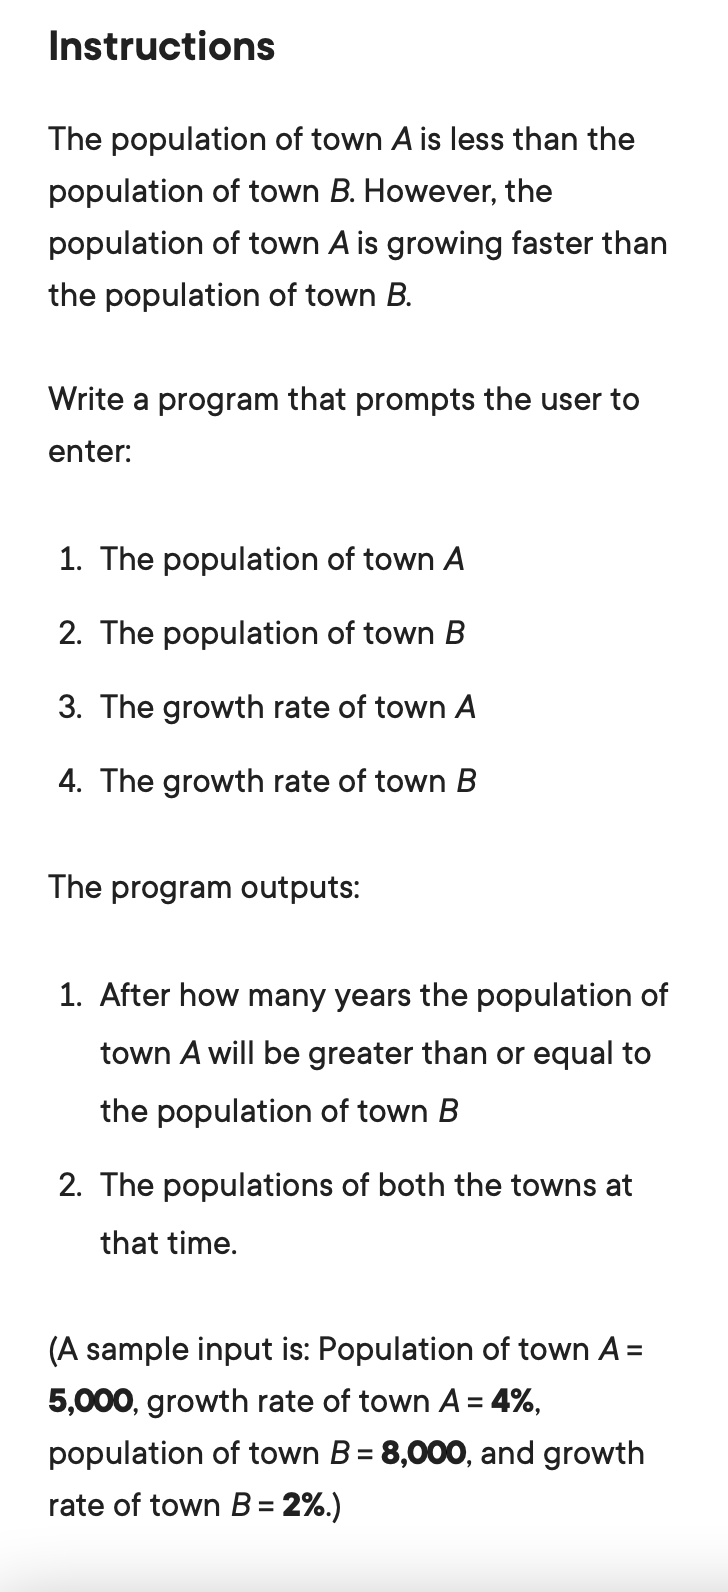 Instructions
The population of town A is less than the
population of town B. However, the
population of town A is growing faster than
the population of town B.
Write a program that prompts the user to
enter:
1. The population of town A
2. The population of town B
3. The growth rate of town A
4. The growth rate of town B
The program outputs:
1. After how many years the population of
town A will be greater than or equal to
the population of town B
2. The populations of both the towns at
that time.
(A sample input is: Population of town A =
5,000, growth rate of town A= 4%,
population of town B = 8,000, and growth
rate of town B = 2%.)
